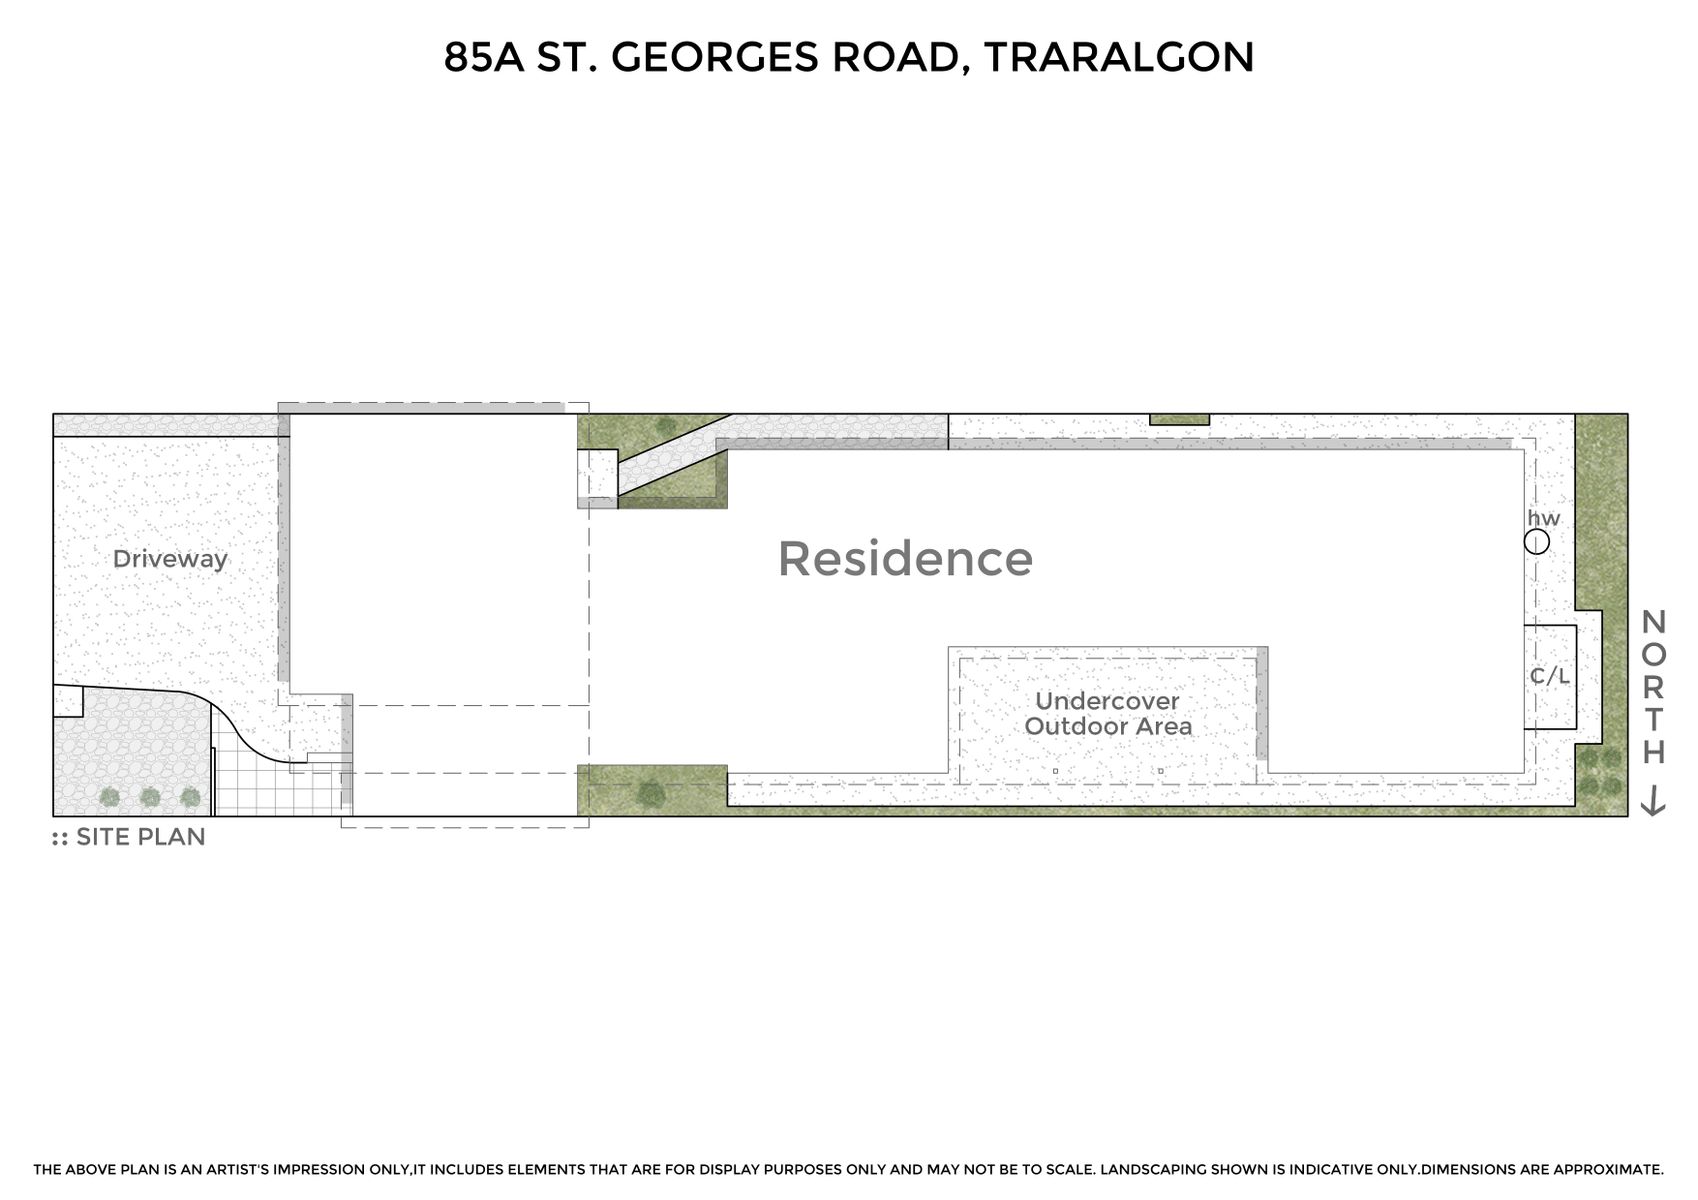 03 PRINT   85A St Georges Rd, Traralgon   Siteplan